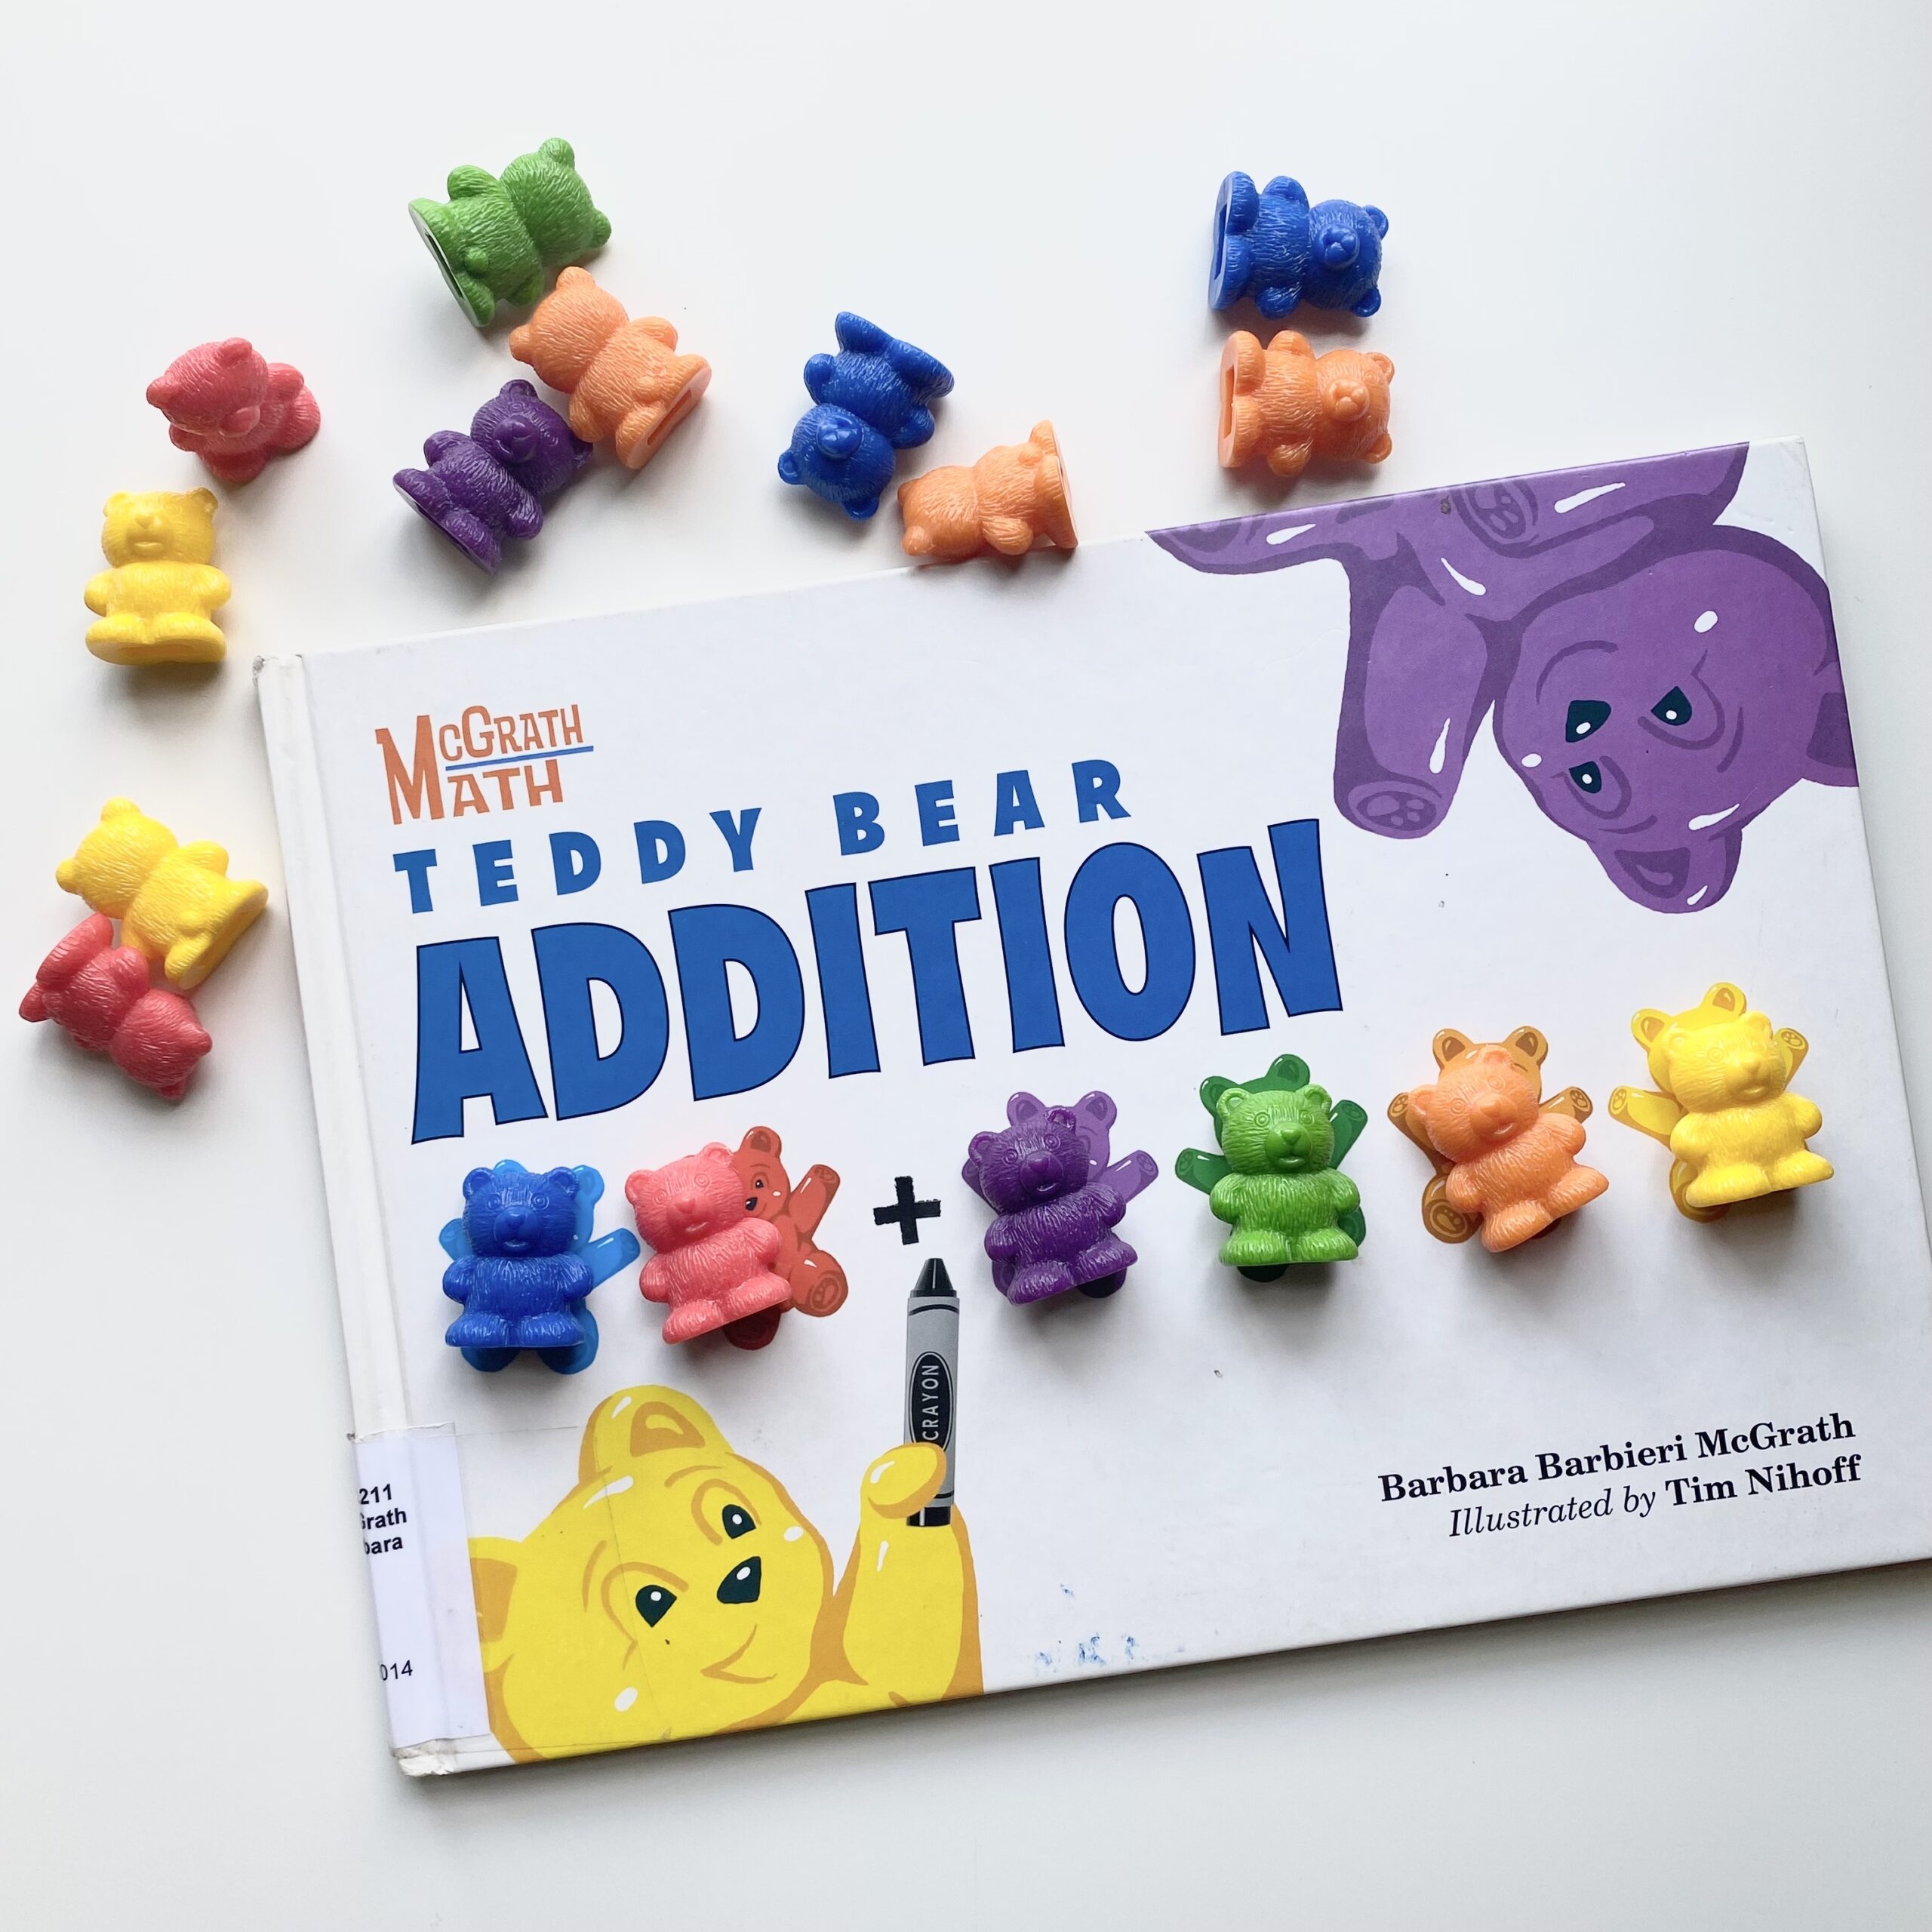 Teddy Bear Addition children's book with brightly colored counting bears surrounding it.